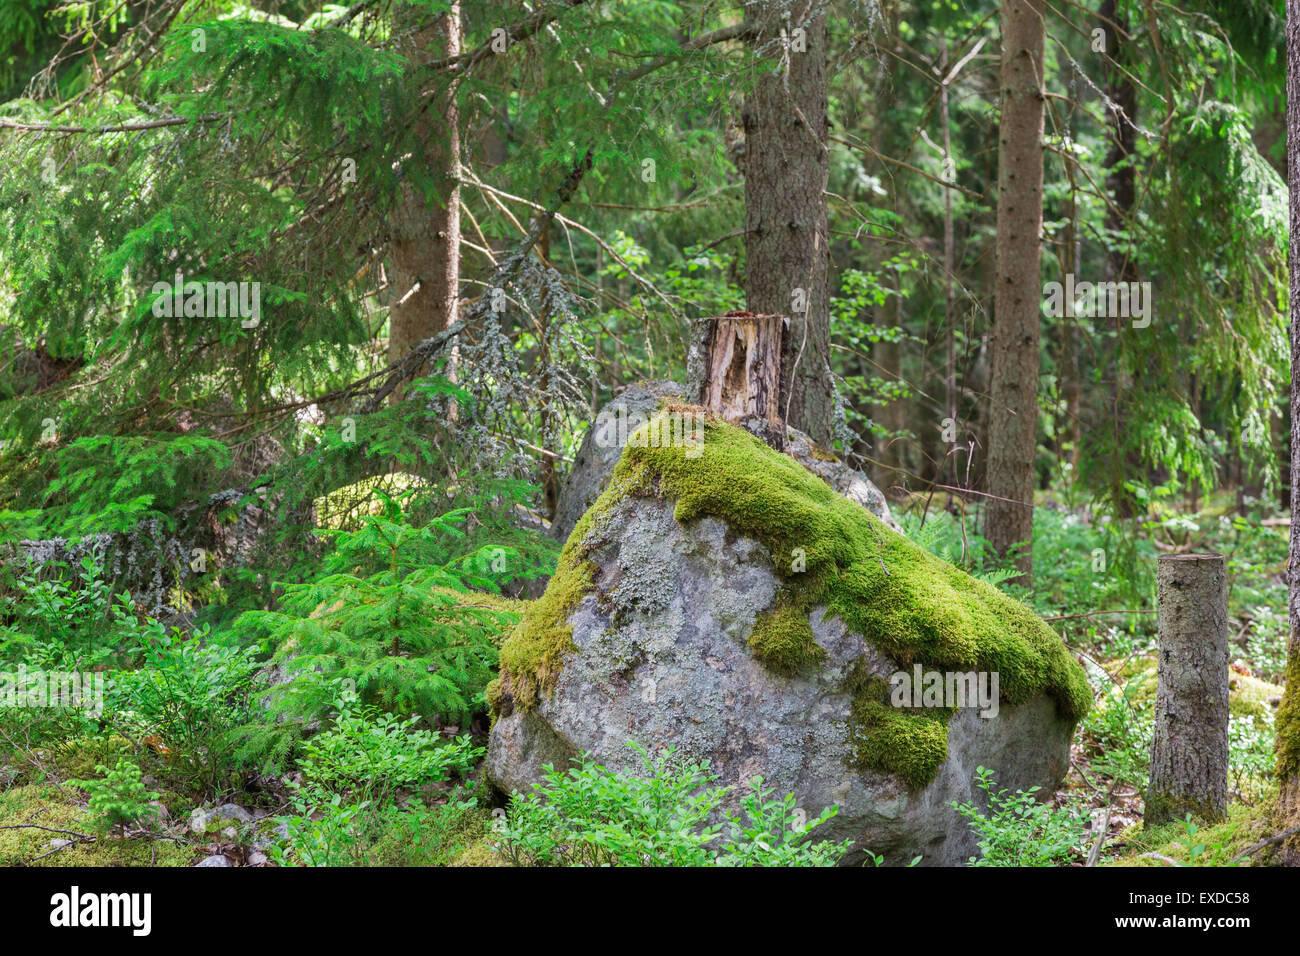 Giant Overgrown Boulder with Moss on Top in Pine Forest Stock Photo